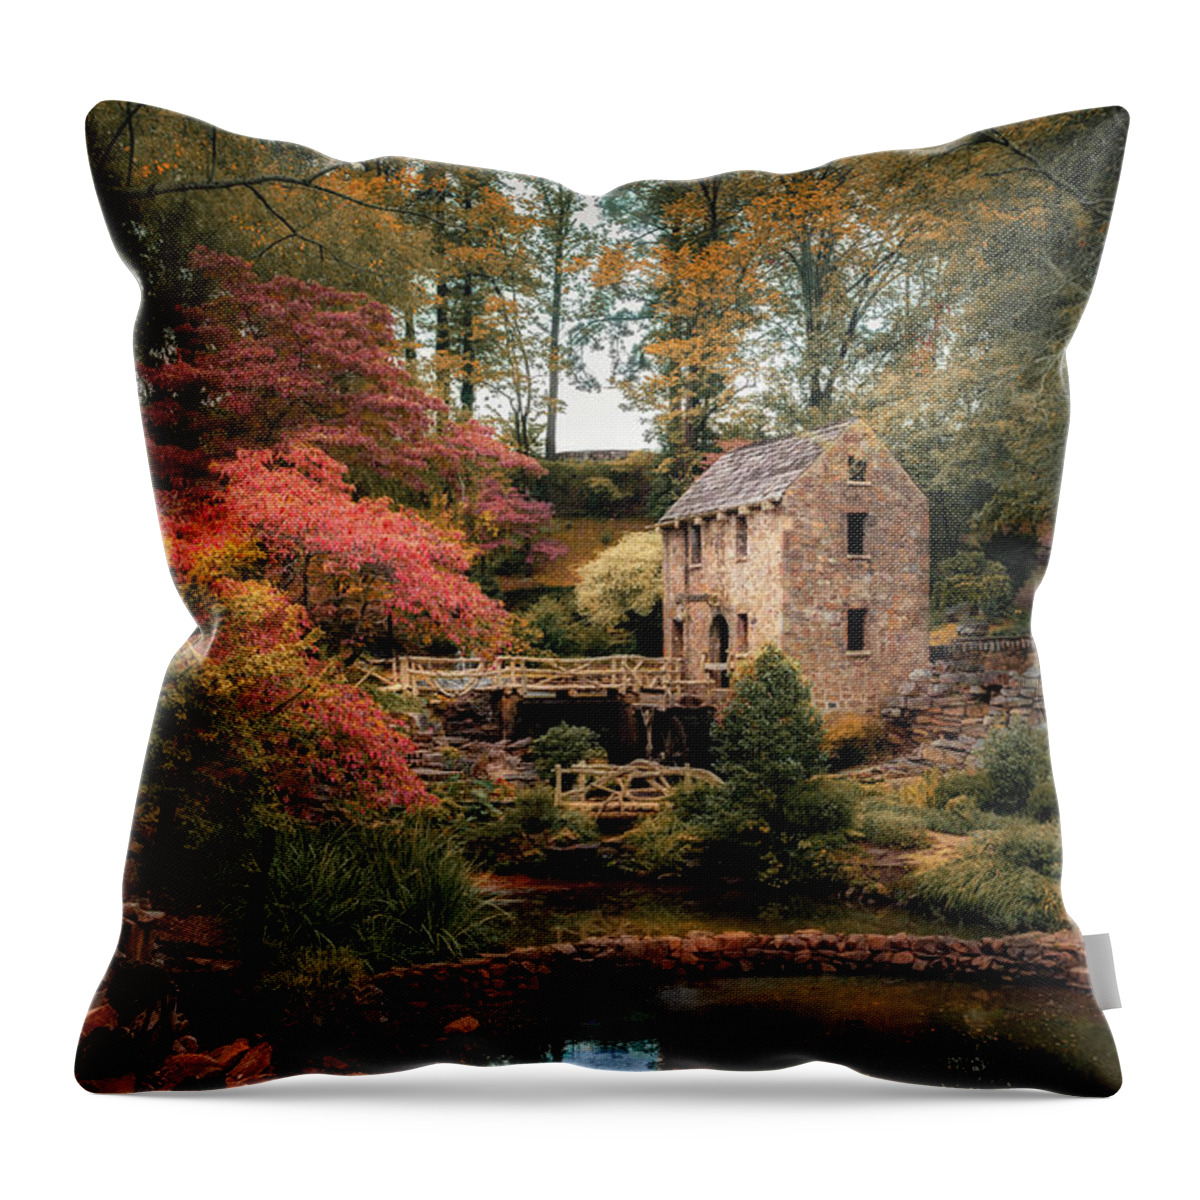 The Old Mill Throw Pillow featuring the photograph The Old Mill by James Barber